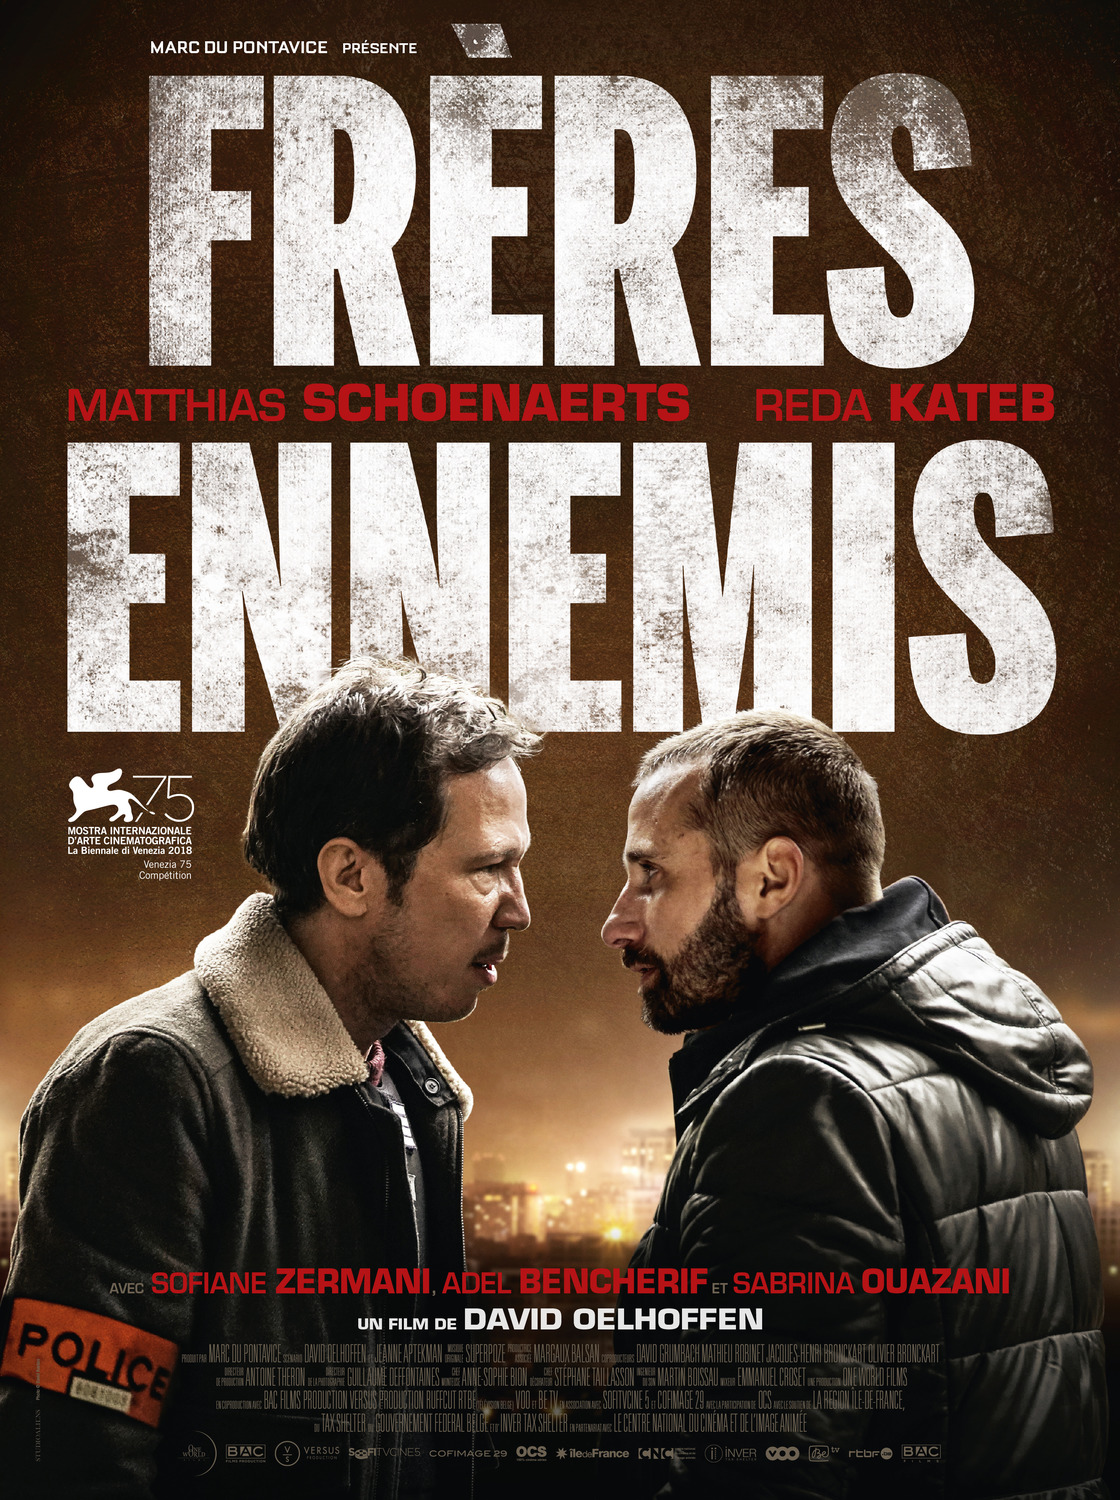 Extra Large Movie Poster Image for Frères ennemis 